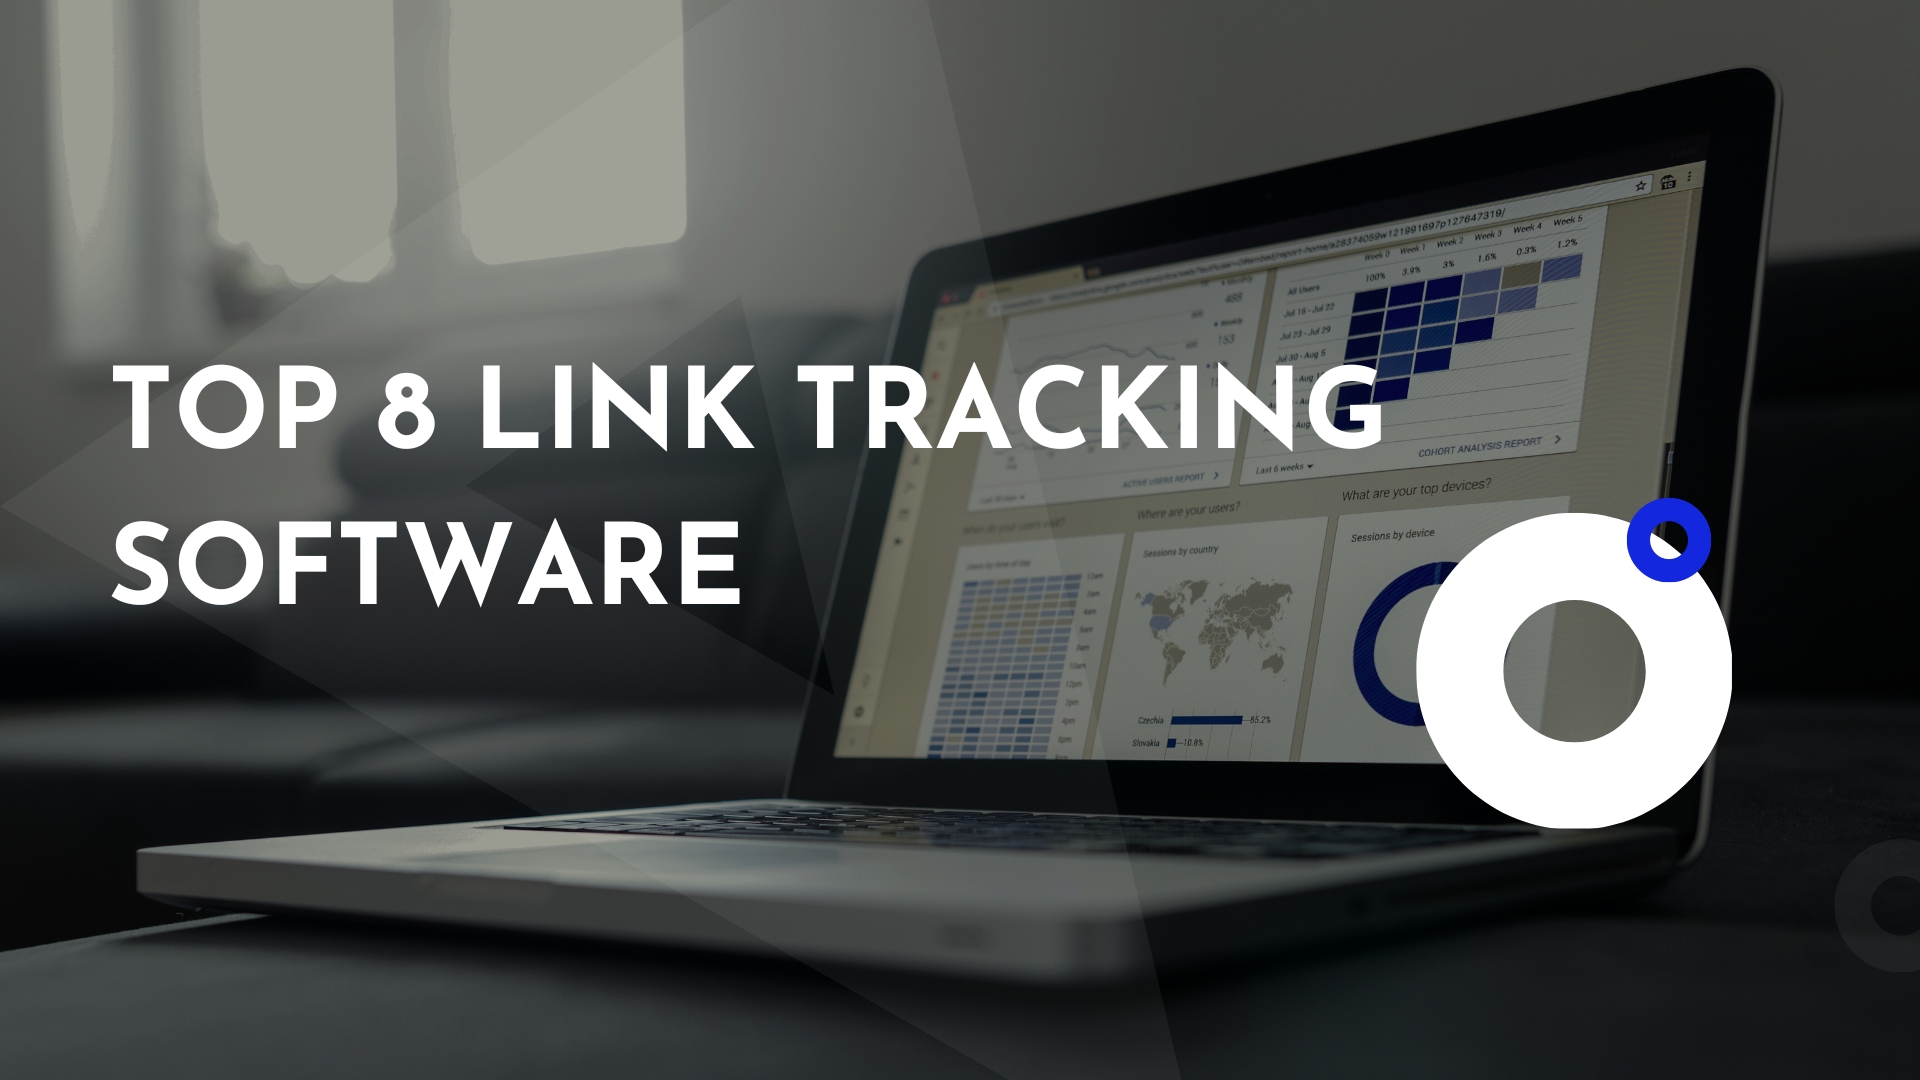 Top 8 Link tracking software